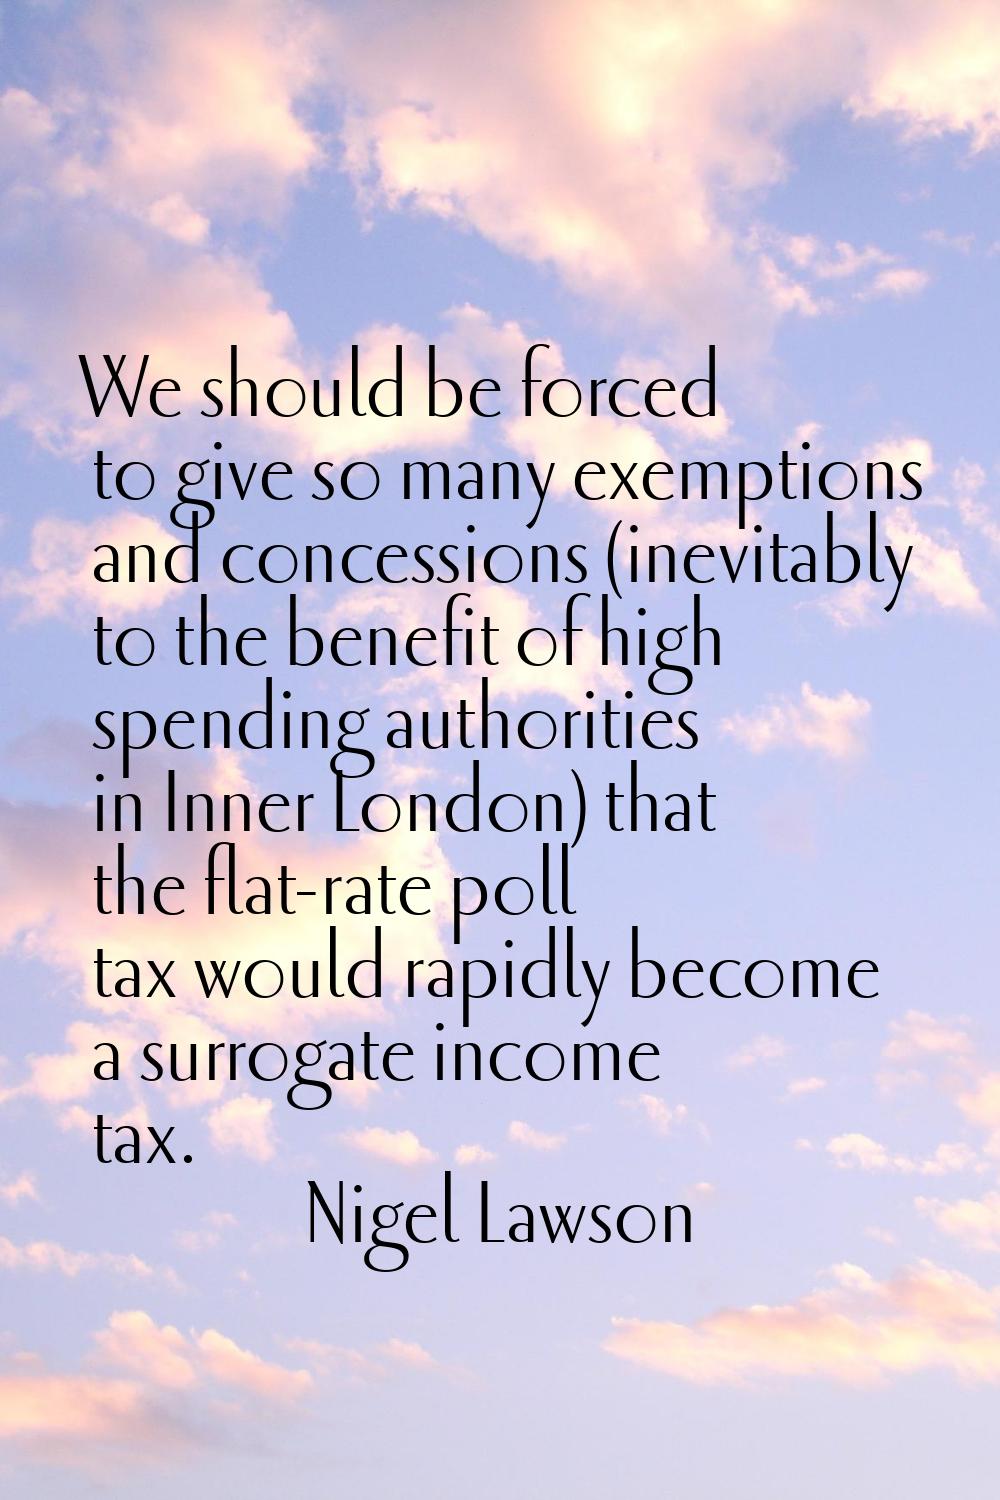 We should be forced to give so many exemptions and concessions (inevitably to the benefit of high s